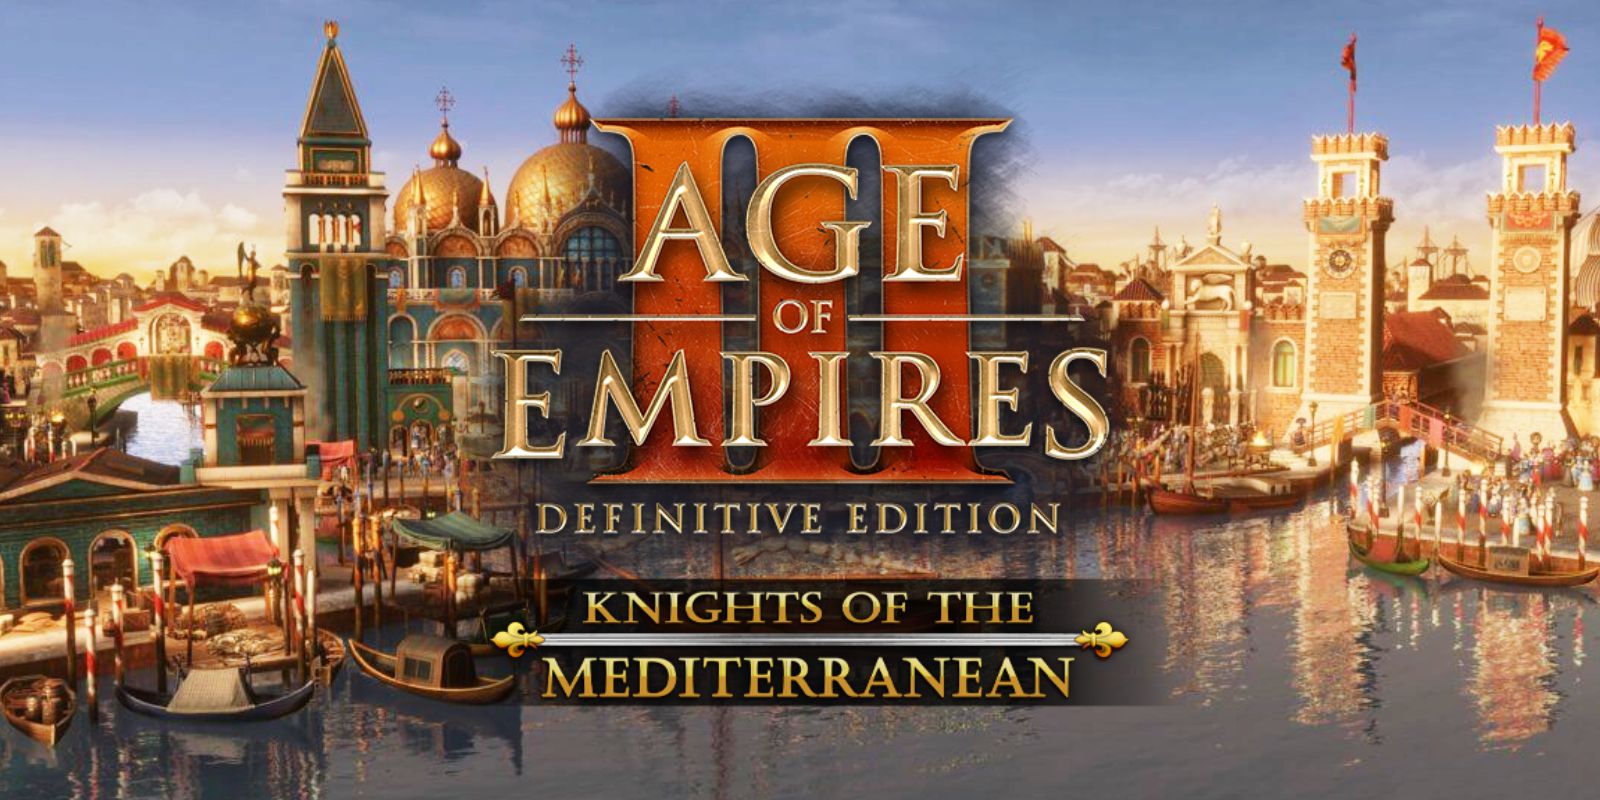 Everything Age Of Empires 3 Knights of the Mediterranean DLC Adds